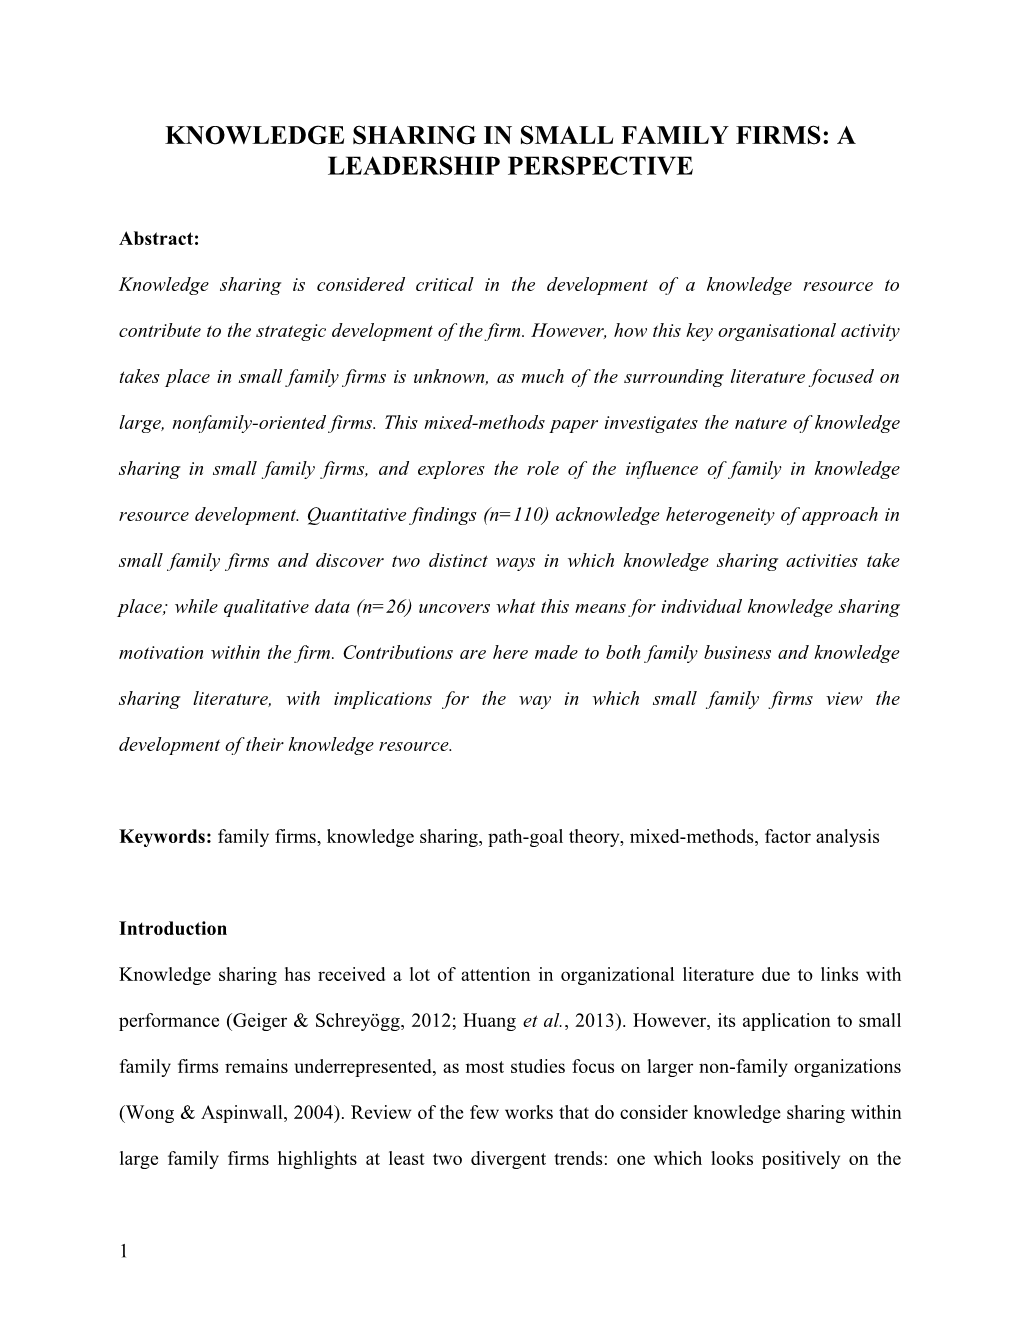 Knowledge Sharing in Small Family Firms: a Leadership Perspective